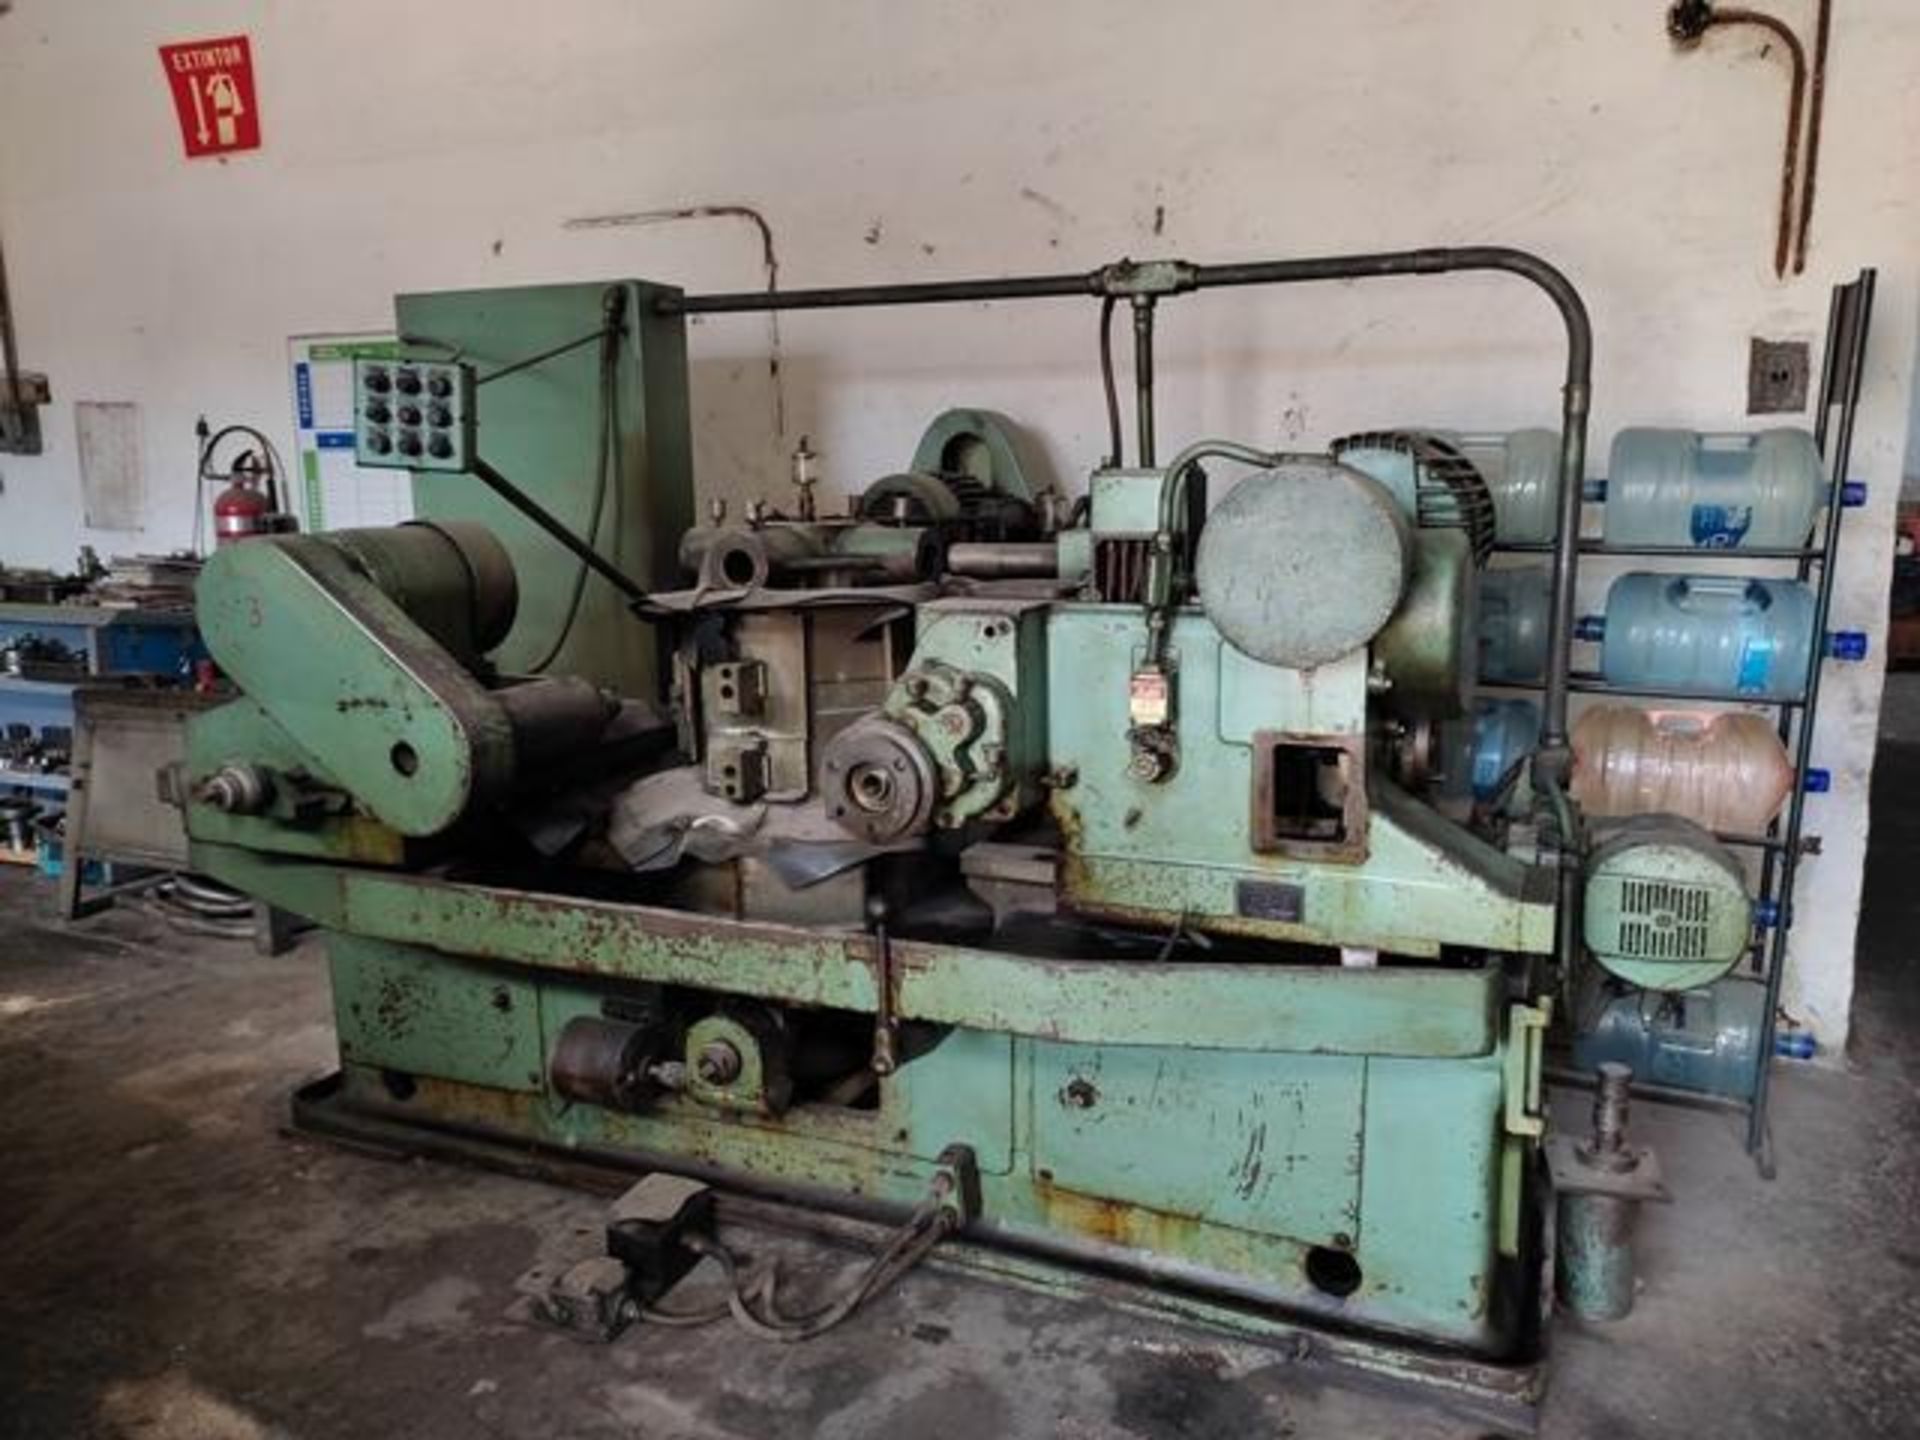 Goss 1-2-3 Chucking Machine, Serial: 2317: 7 Spindle, 3-1/2” Diameter, 4 Chucking Positions with - Image 2 of 26